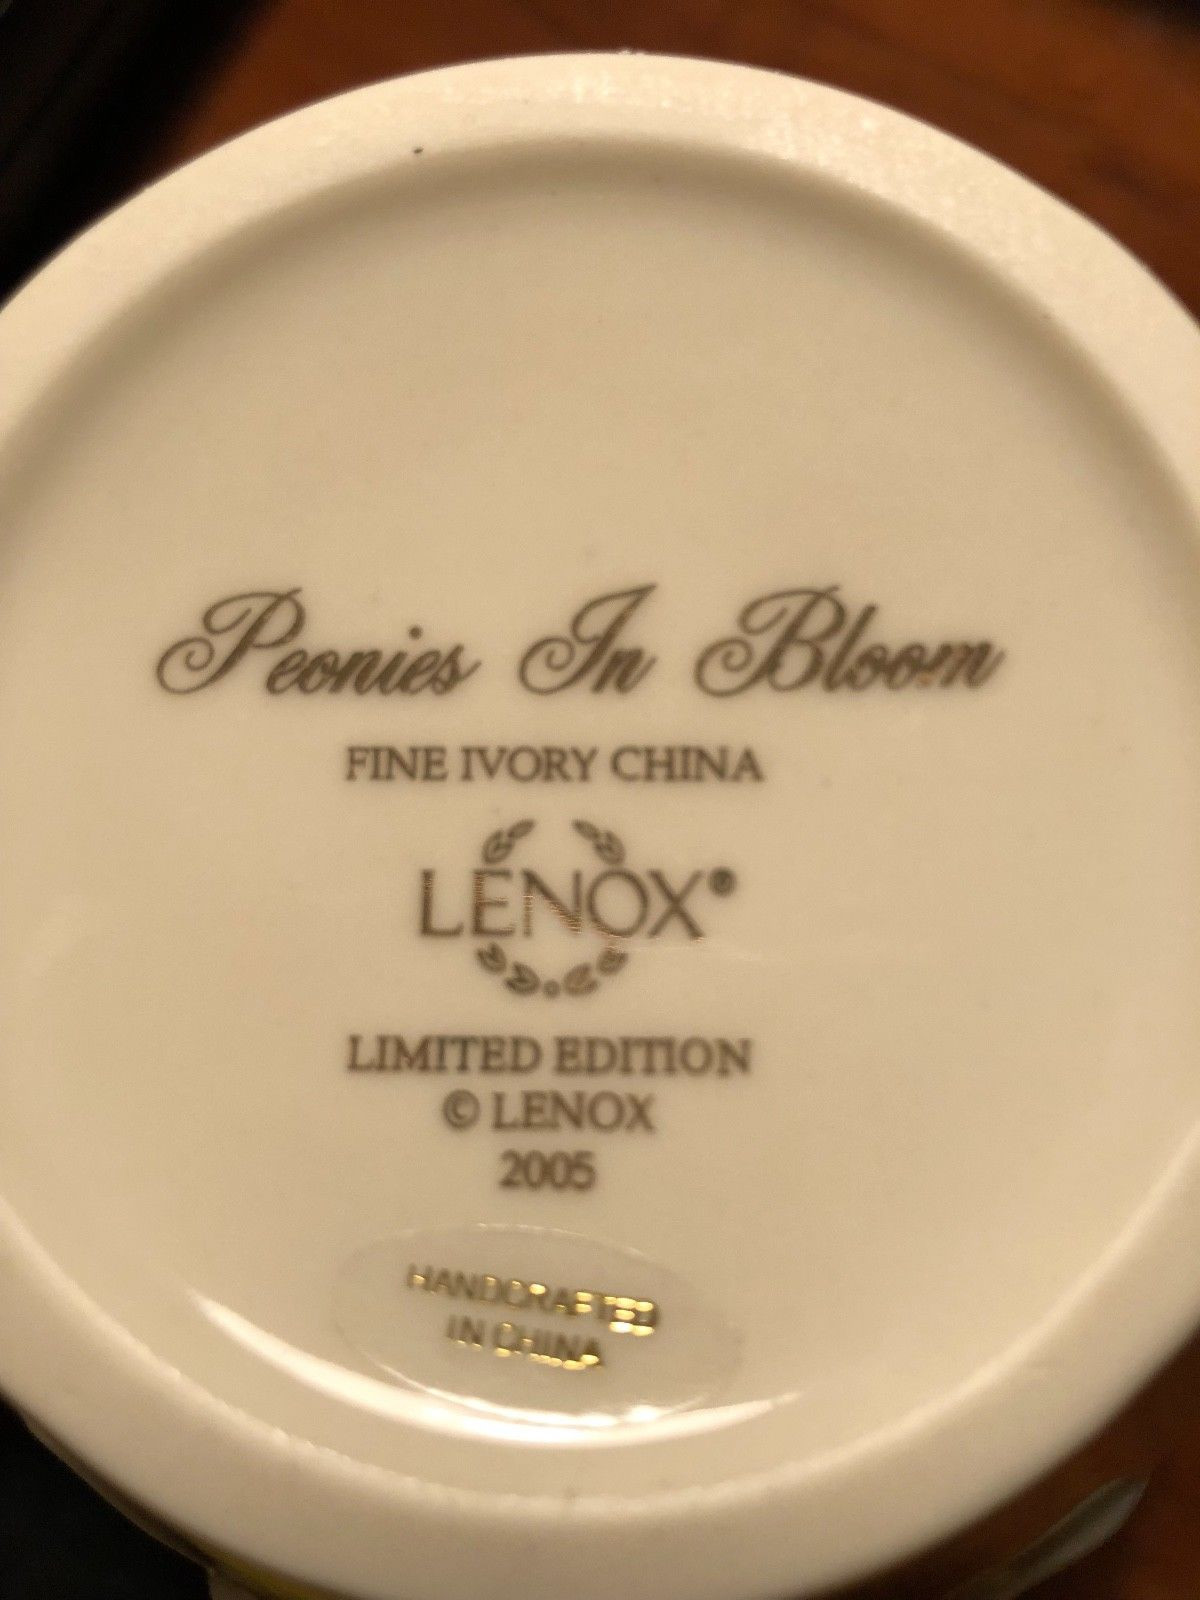 24 attractive Lenox Vases Ebay 2024 free download lenox vases ebay of lenox peonies in bloom limited edition vase 25 00 picclick with regard to 1 of 4only 1 available